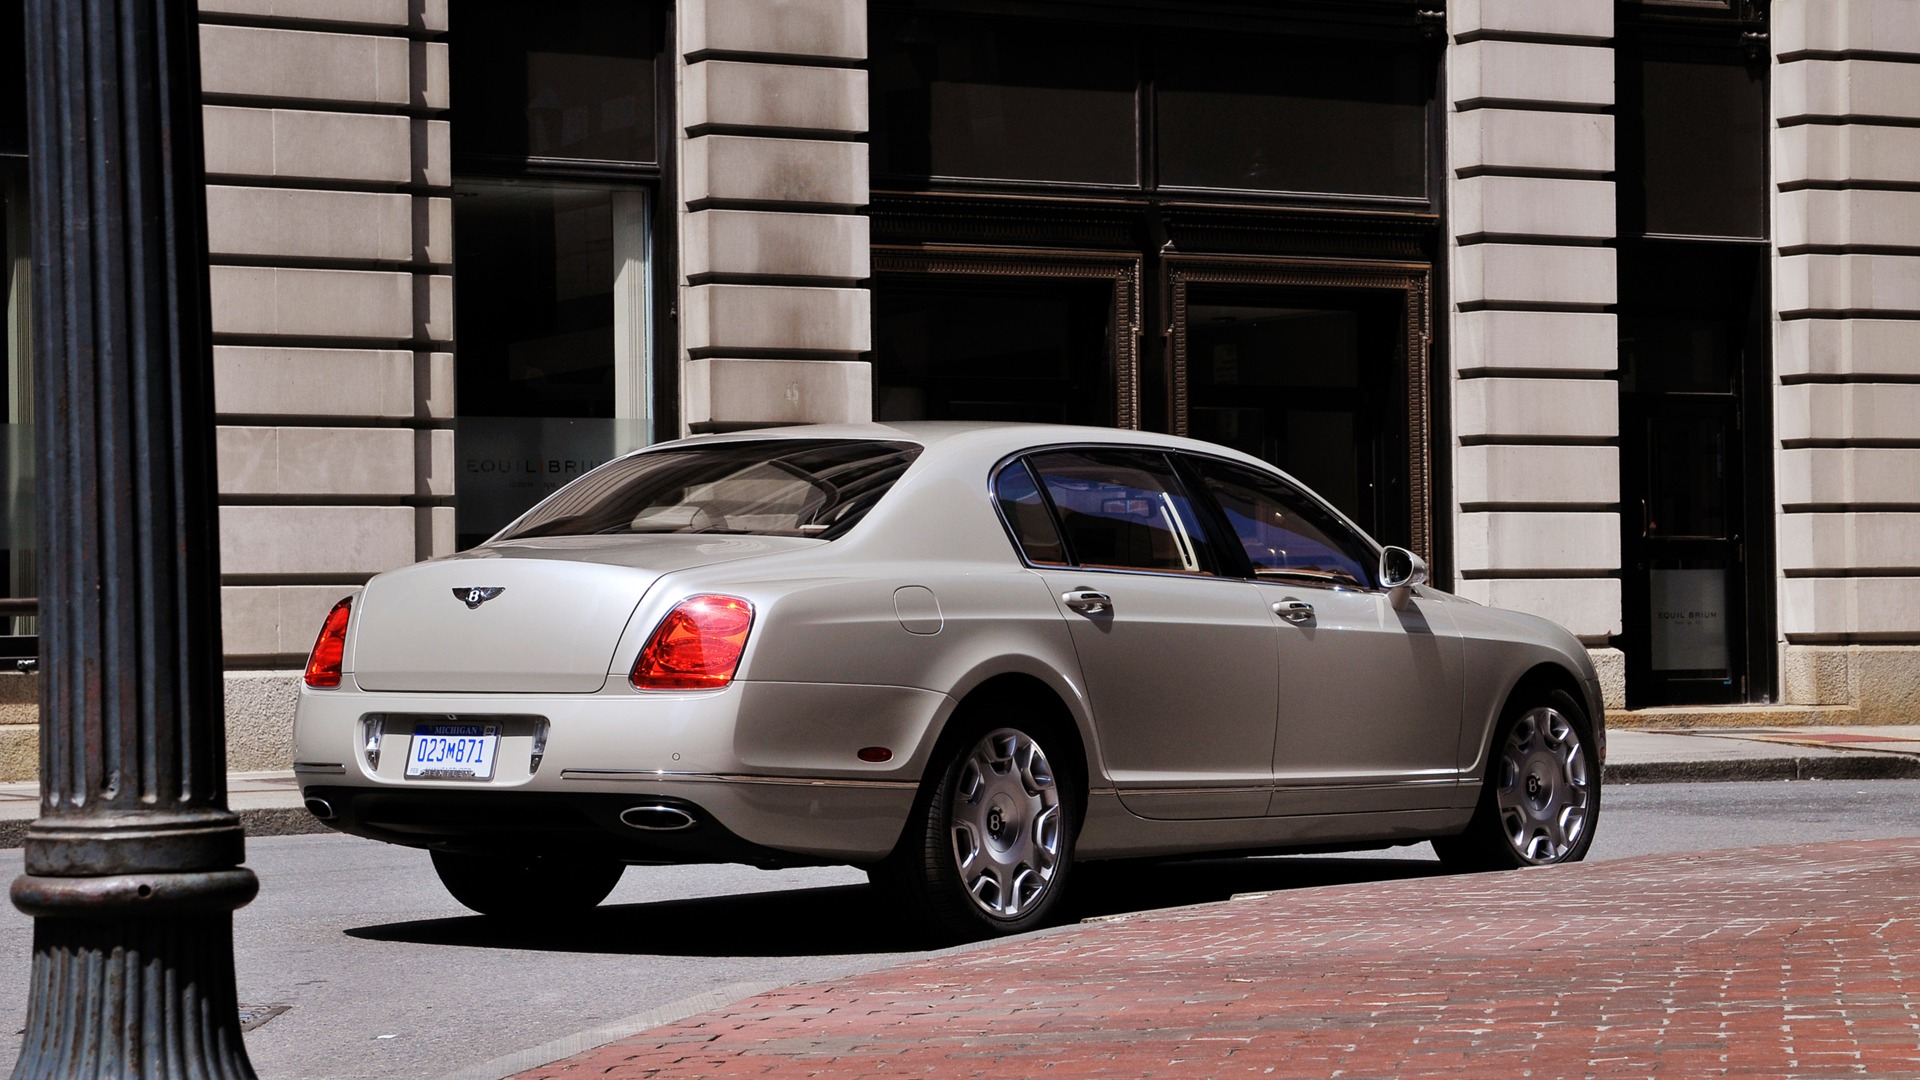 Bentley Continental Flying Spur - 2008 賓利 #9 - 1920x1080